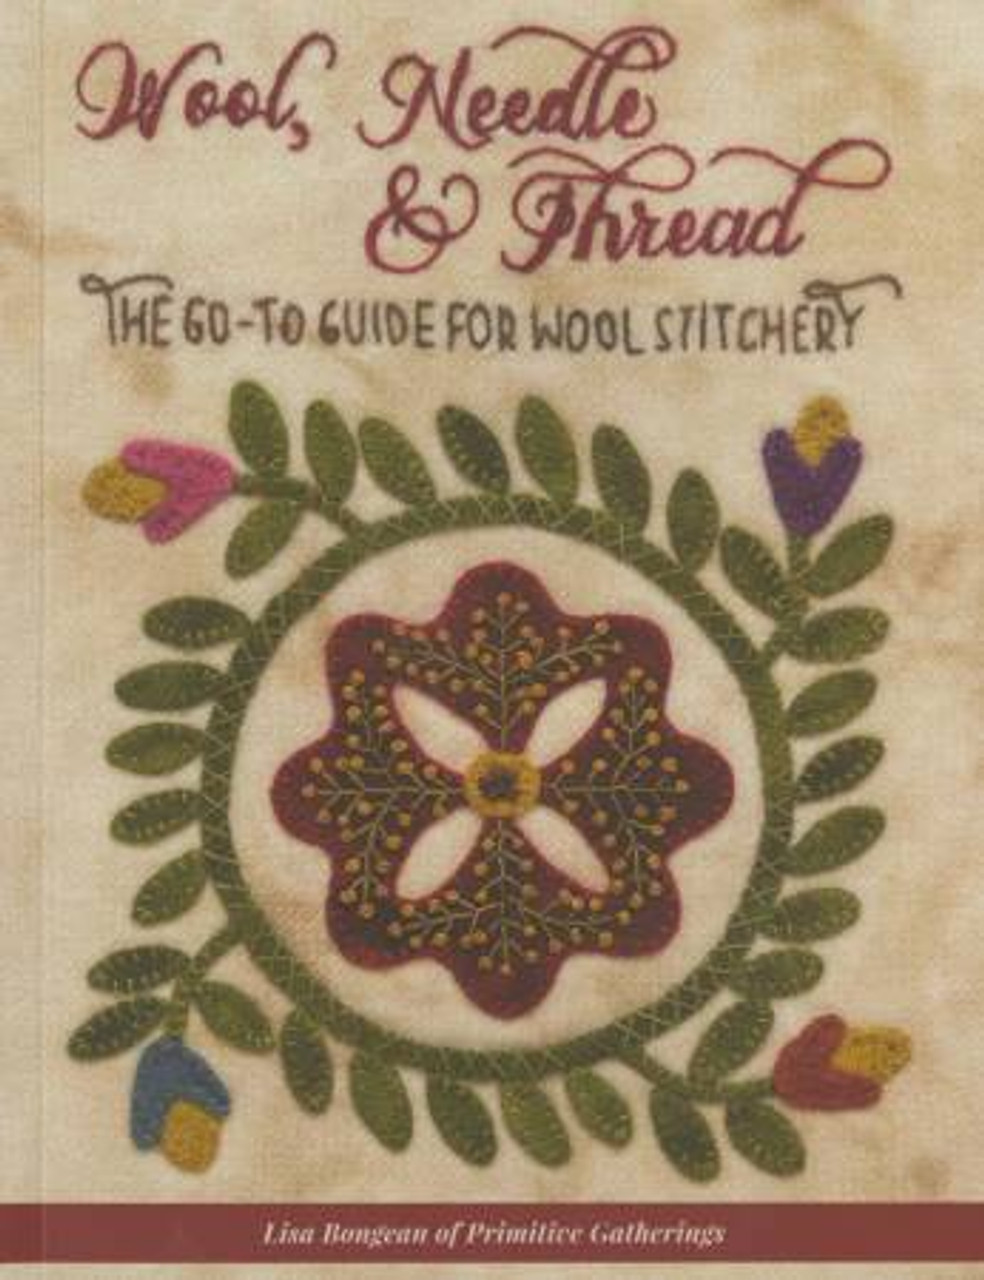 Learn to Embroider Kit – threadbook